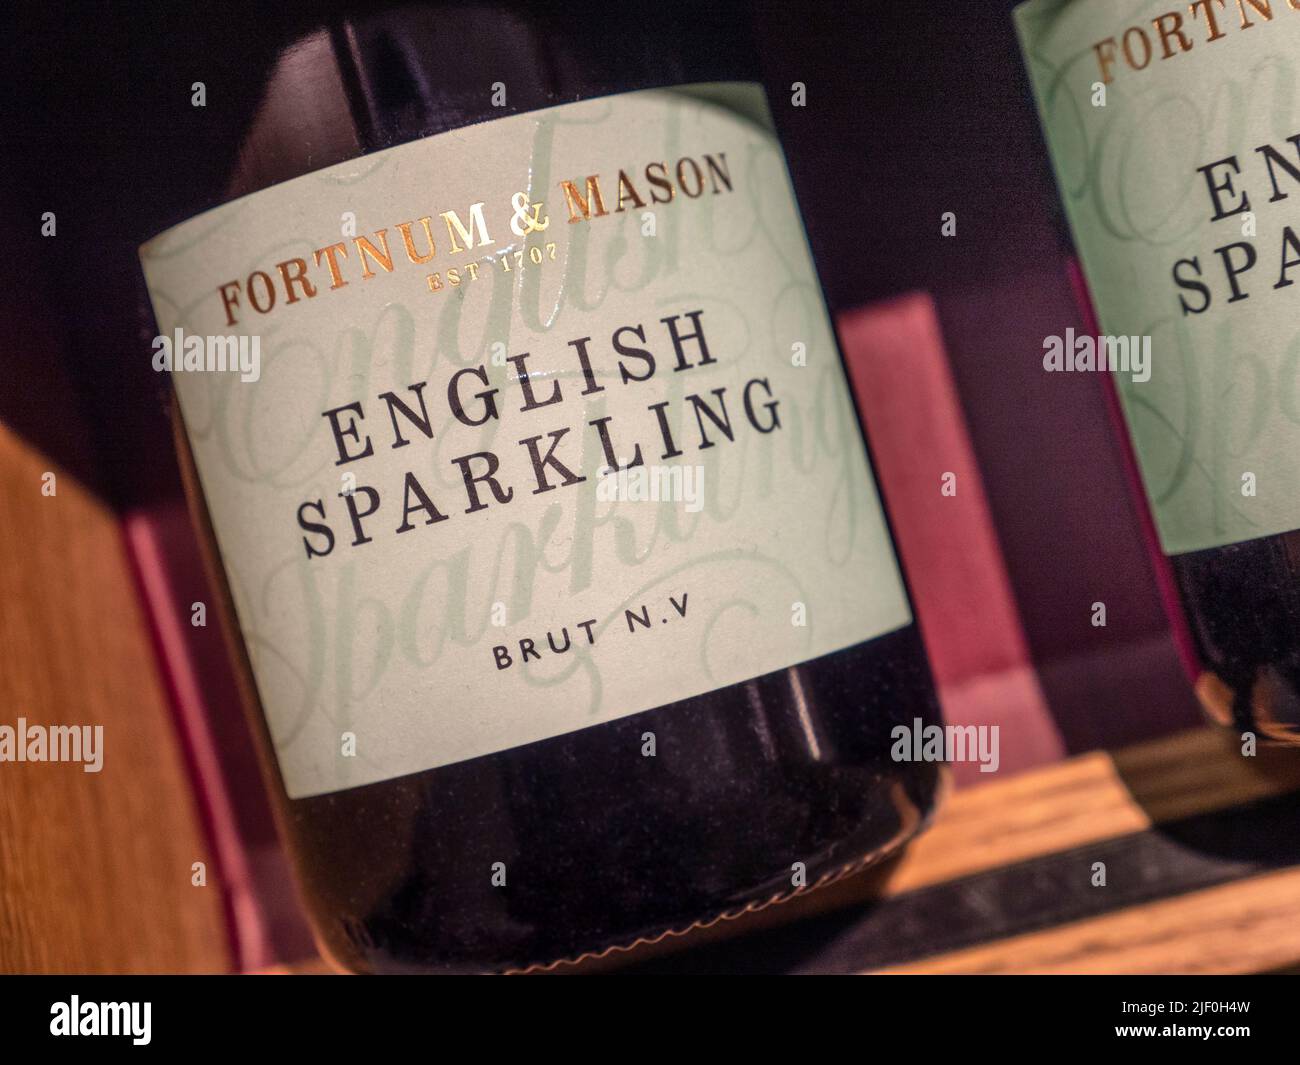 Fortnum and Mason English Sparkling Brut Wine Bottle Label on display for sale. Fortnum and Mason English Sparkling Brut  N.V. Fine example of wine produced by Camel Valley. Winemaker Sam Lindo ensures that the elegant fruit aromas and subtle flavours developed in the vineyard are retained, creating elegant fruit aromas with delicate apple fruit, and crisp vibrant acidity on the finish. Fortnum's English Sparkling Wine, Camel Valley, 75cl UK Stock Photo